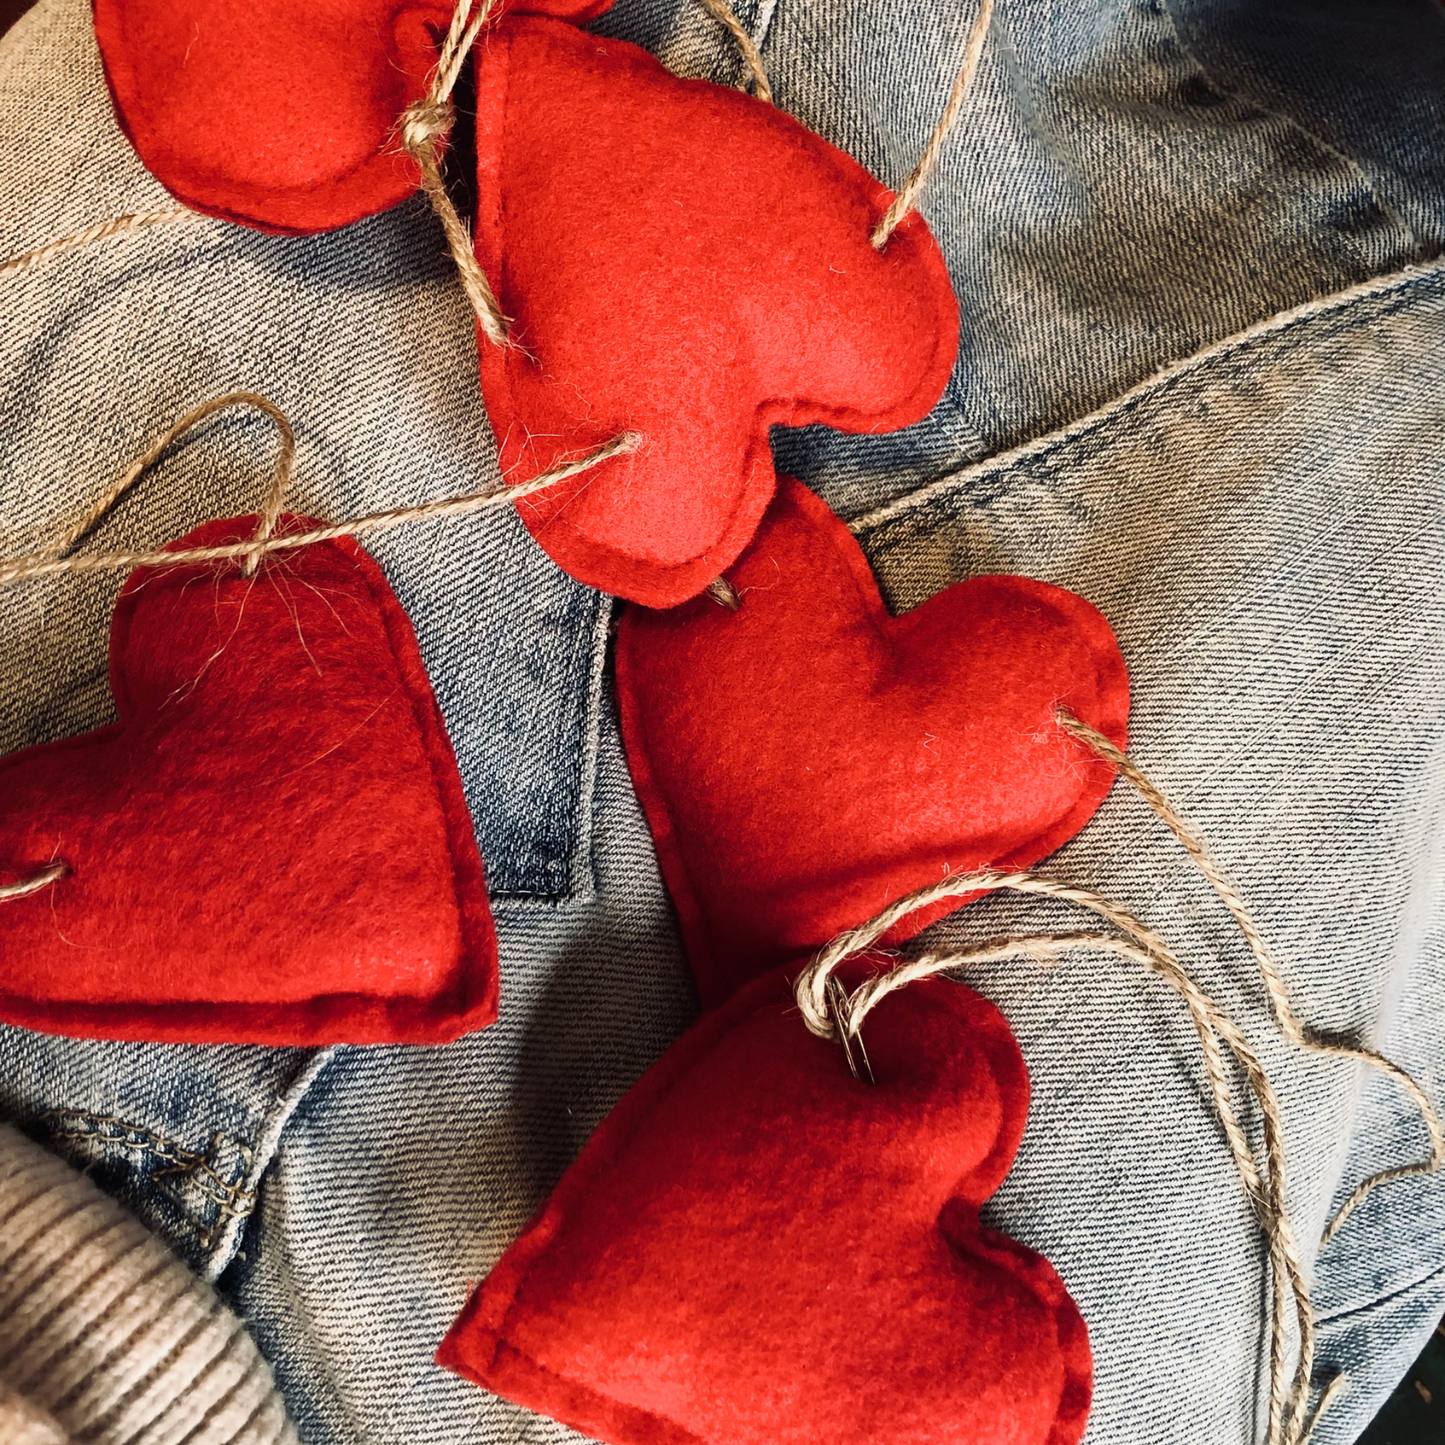 Felted Red Hearts Garland on Jute Twine-5 foot